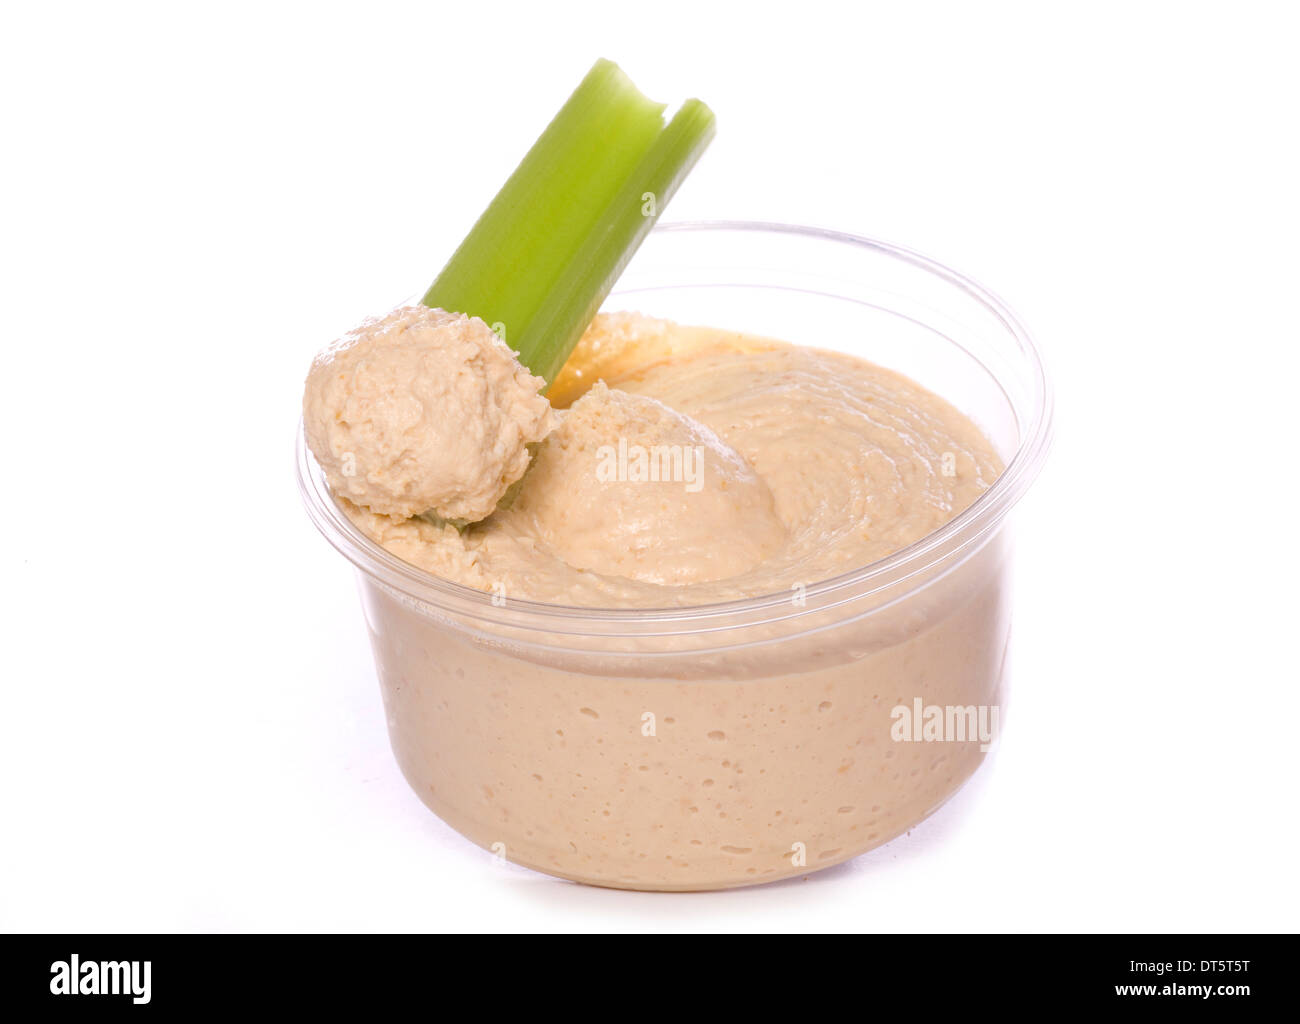 low fat food hummus and celery cutout Stock Photo